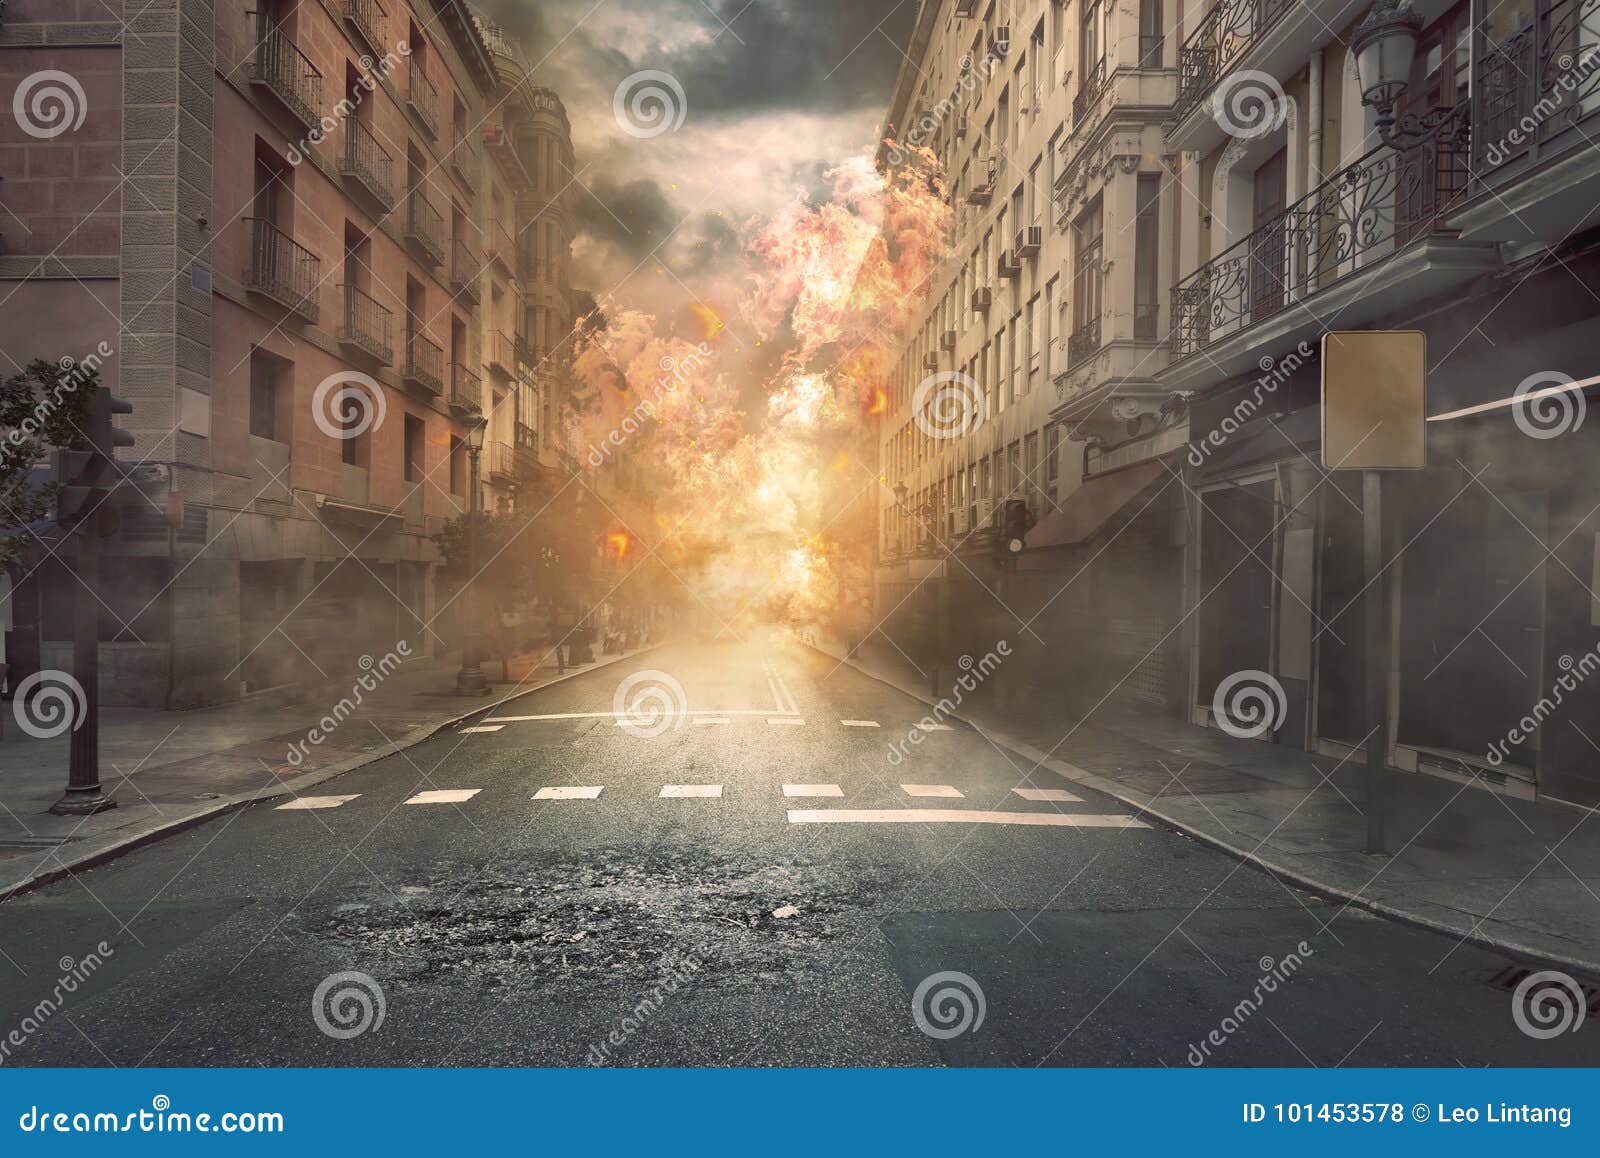 view of destruction city with fires and explosion